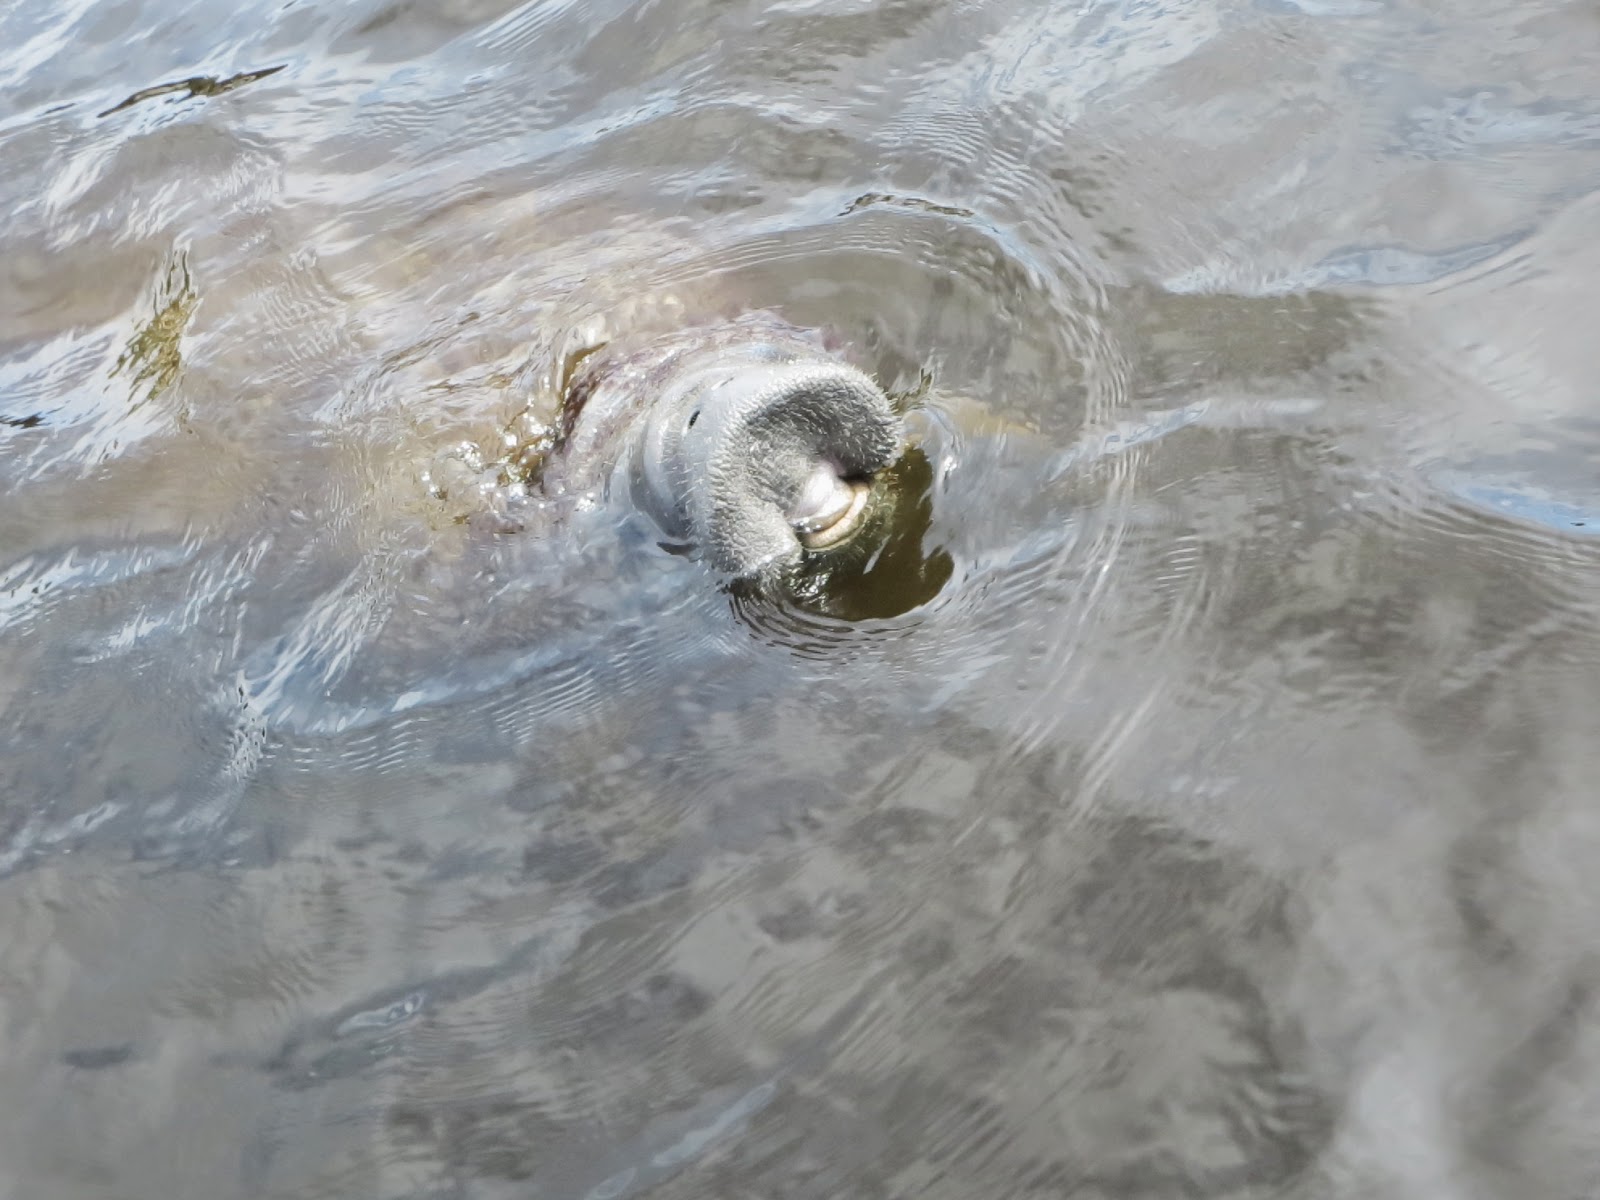 Manatee snout peeking out of the water